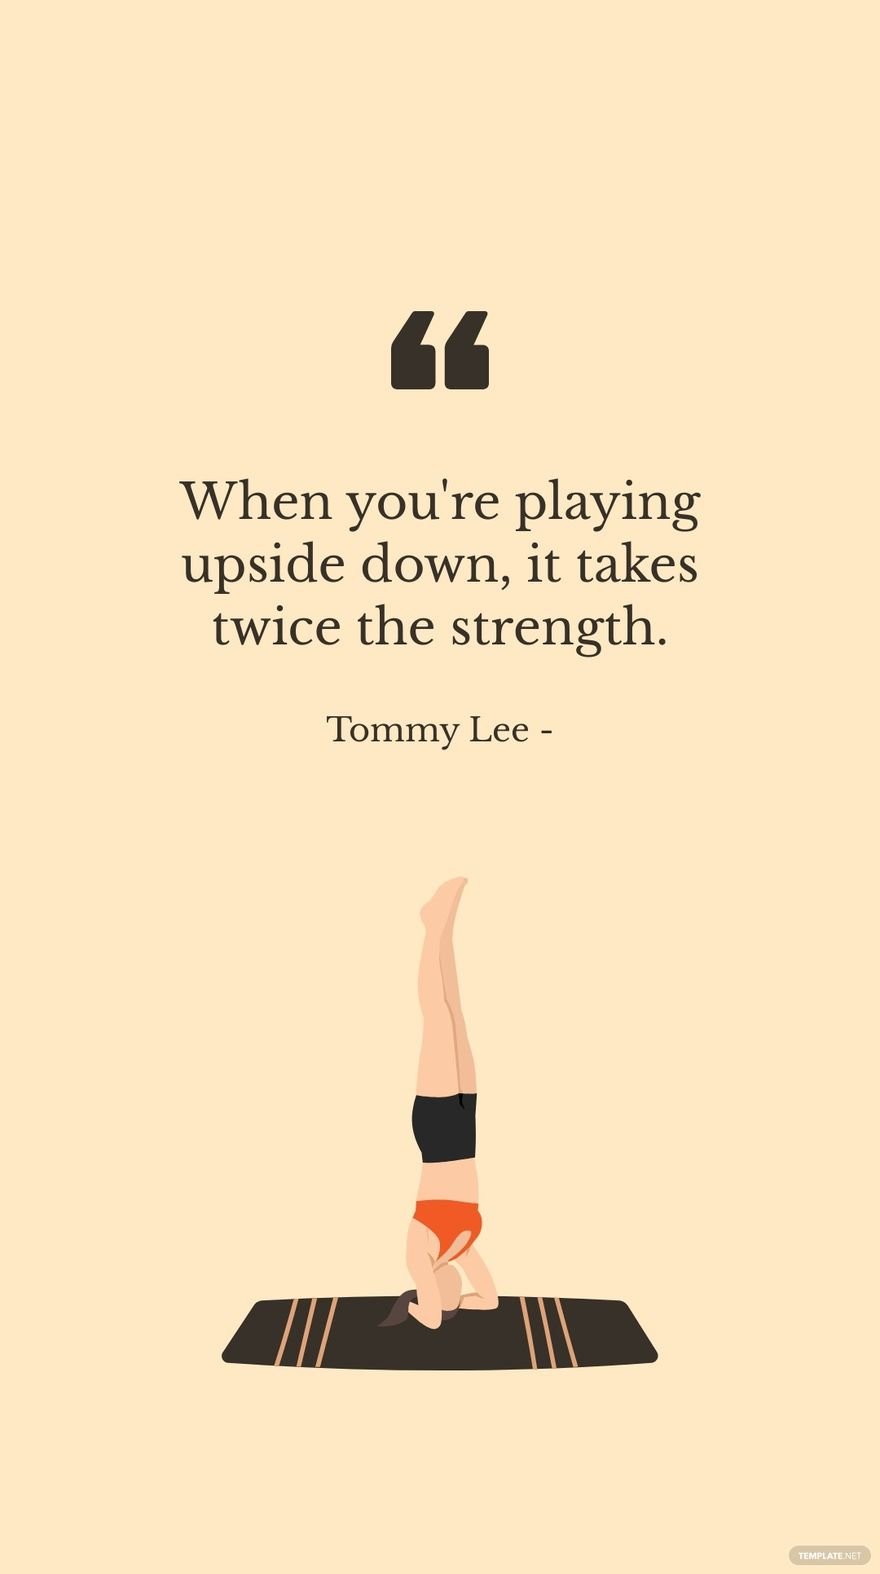 Free Tommy Lee - When you're playing upside down, it takes twice the strength. in JPG